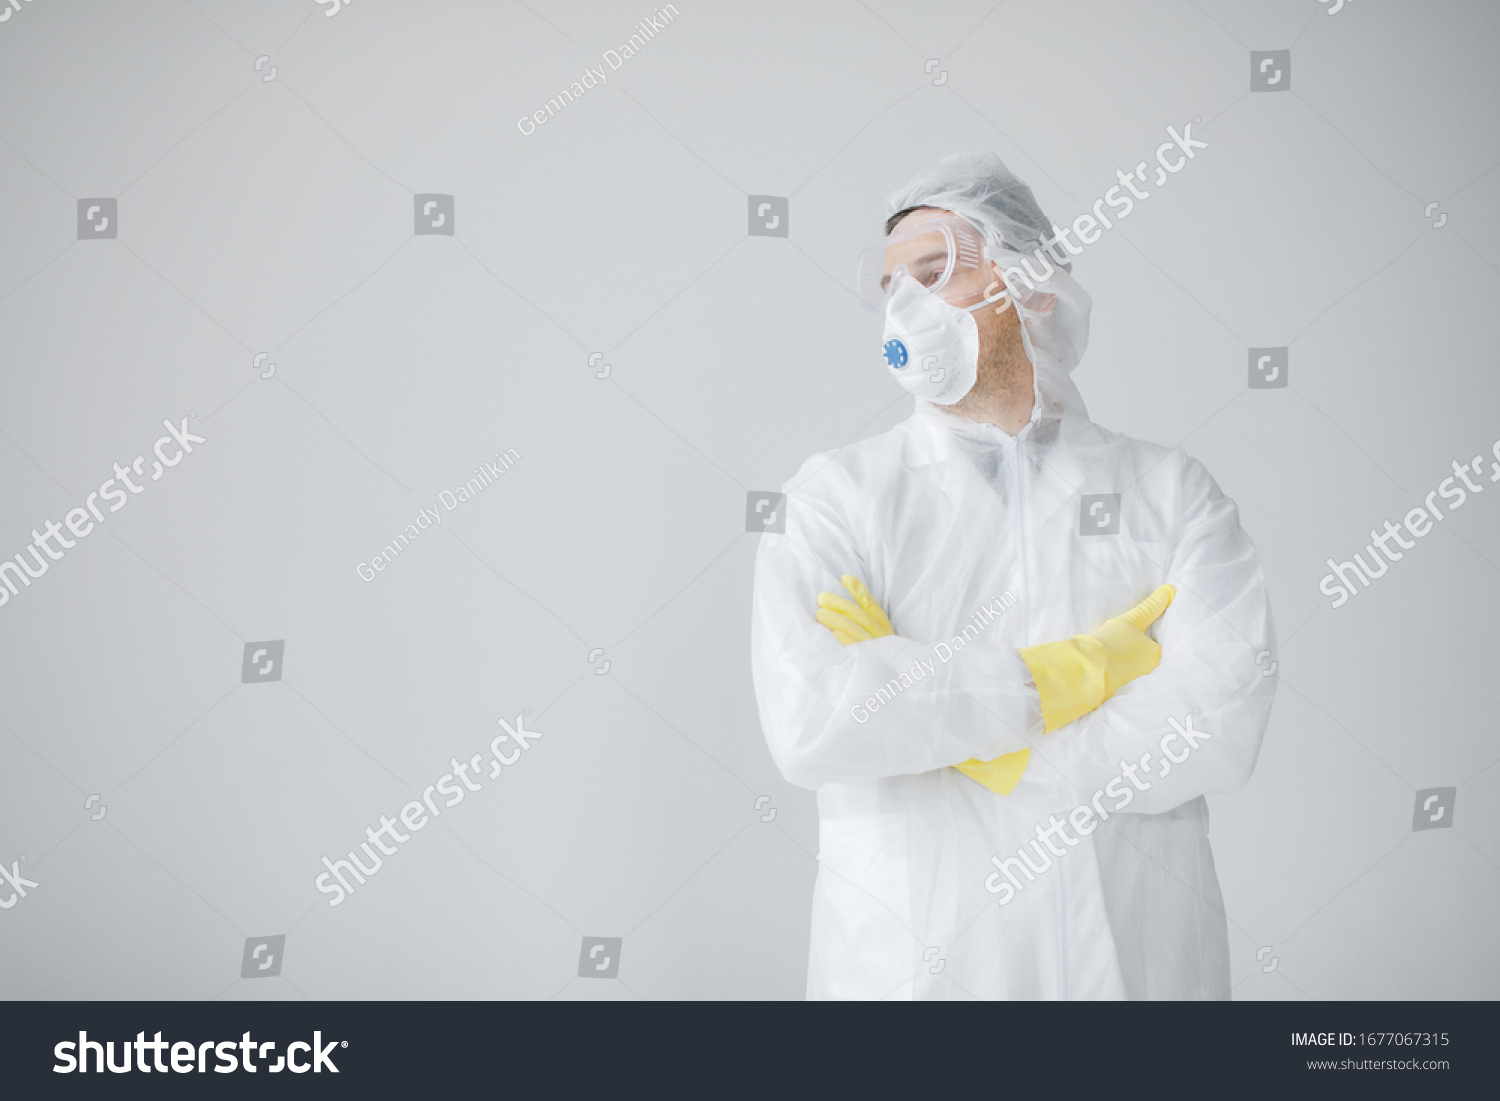 Man in white protective suit, mask, glasses and gloves is coughing on white background, coronavirus pandemic threat. Epidemic, pandemic of coronavirus covid 19. Doctor, patient in respirator. #1677067315